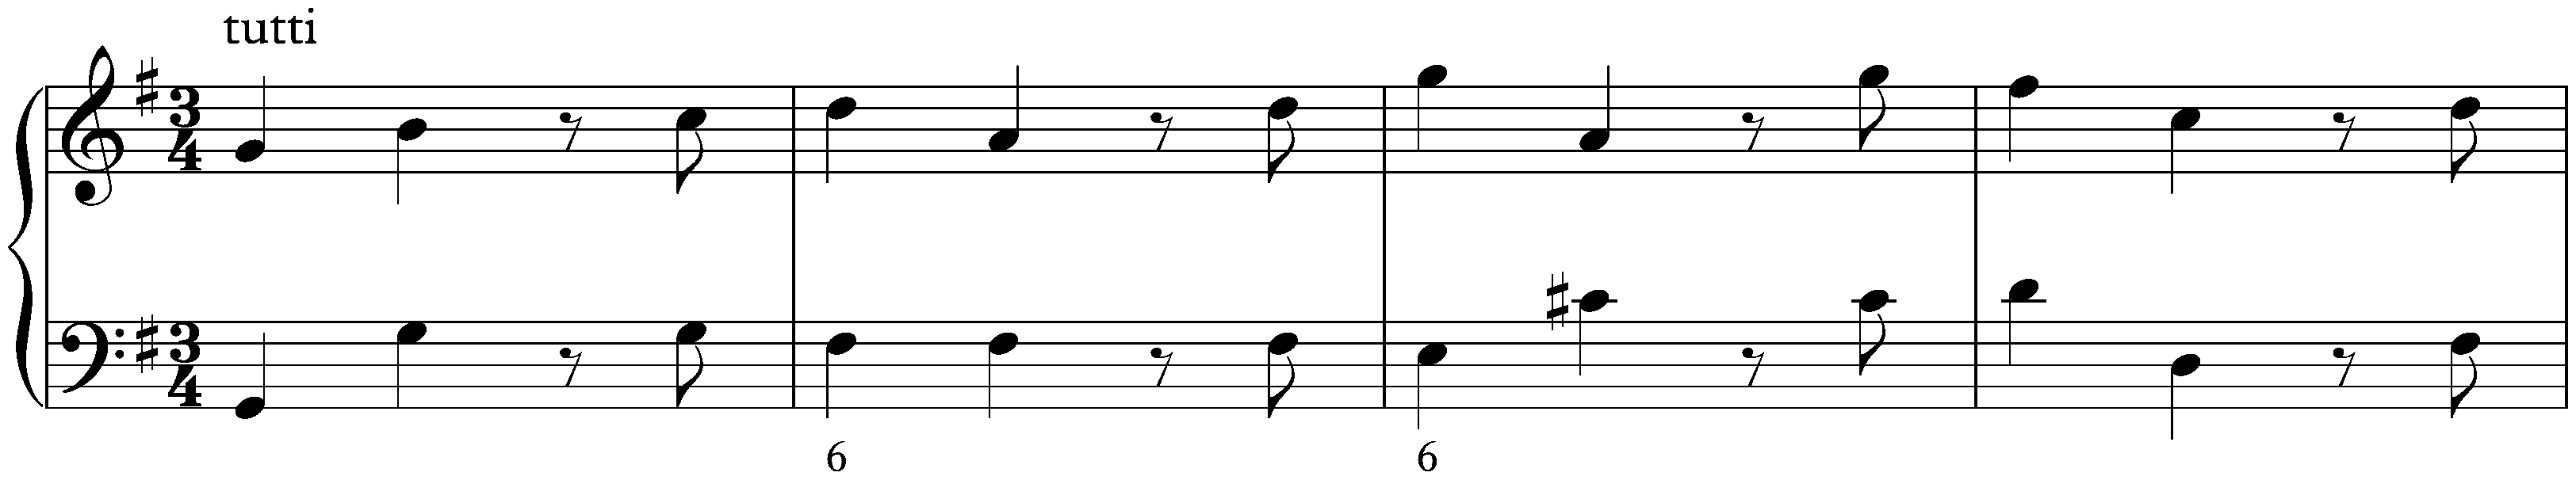 Chaconne in G major, HWV 435 (first version)